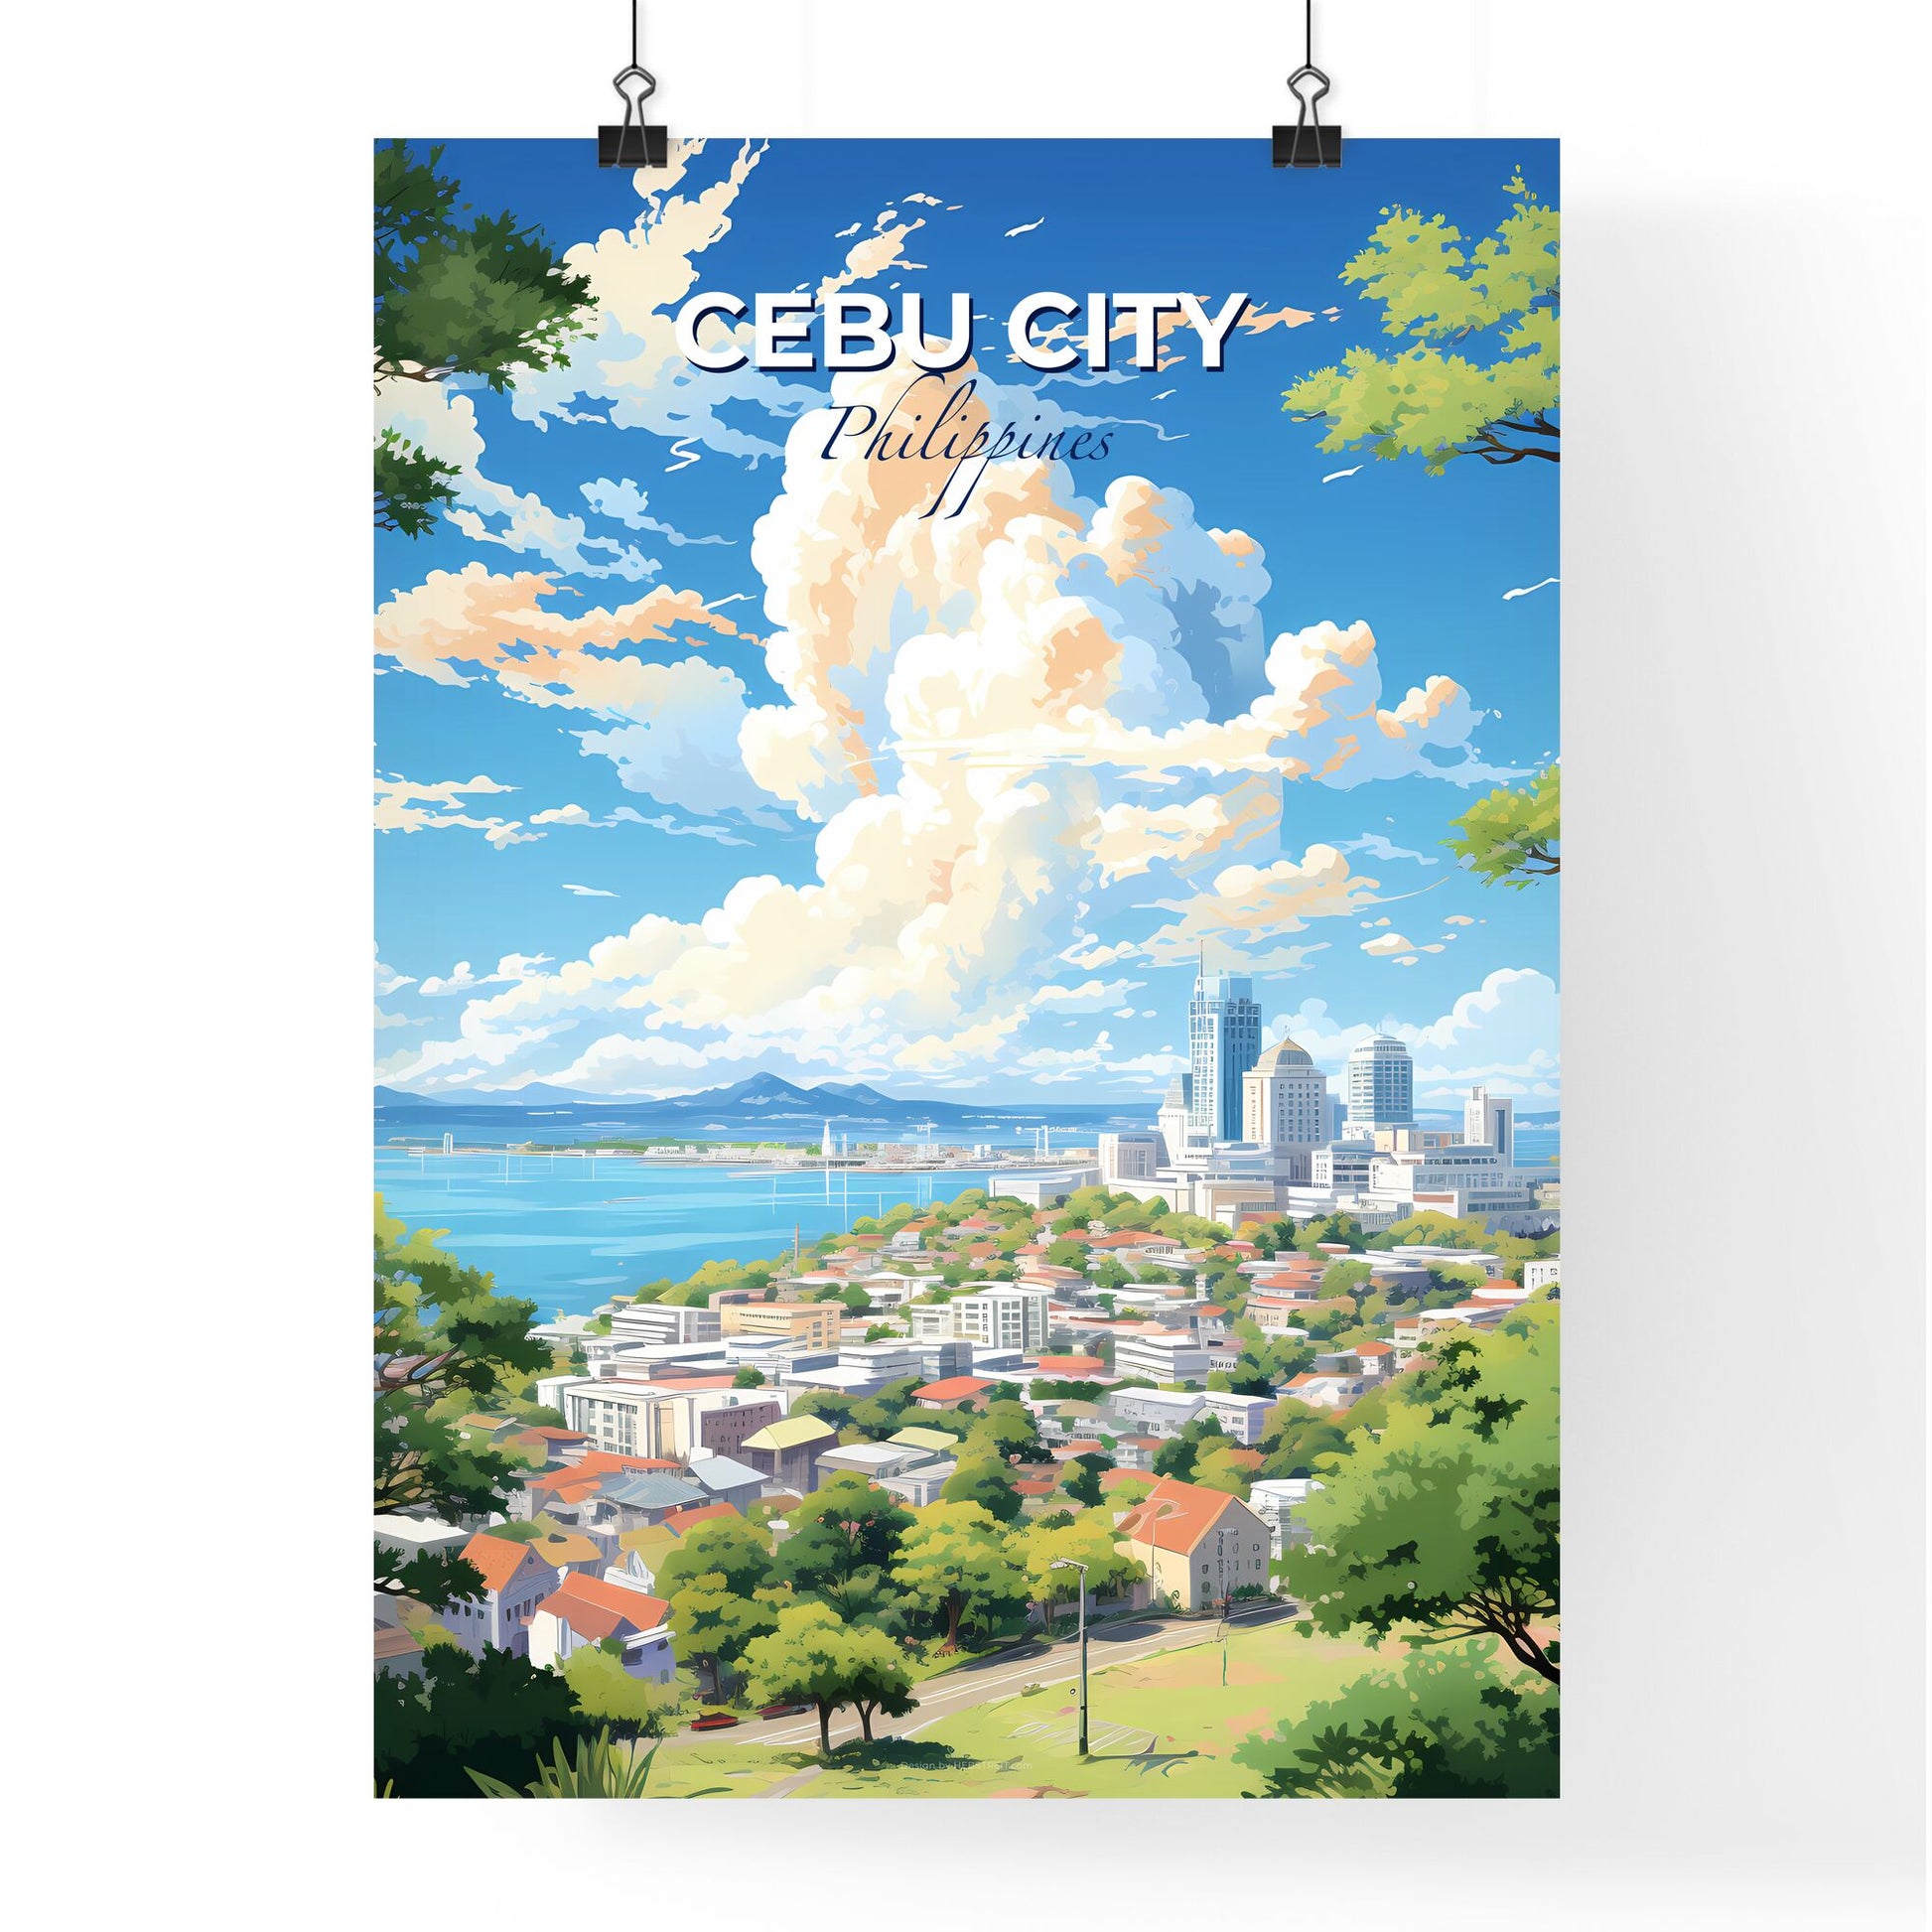 Cebu City Philippines Skyline - A City By The Water - Customizable Travel Gift Default Title